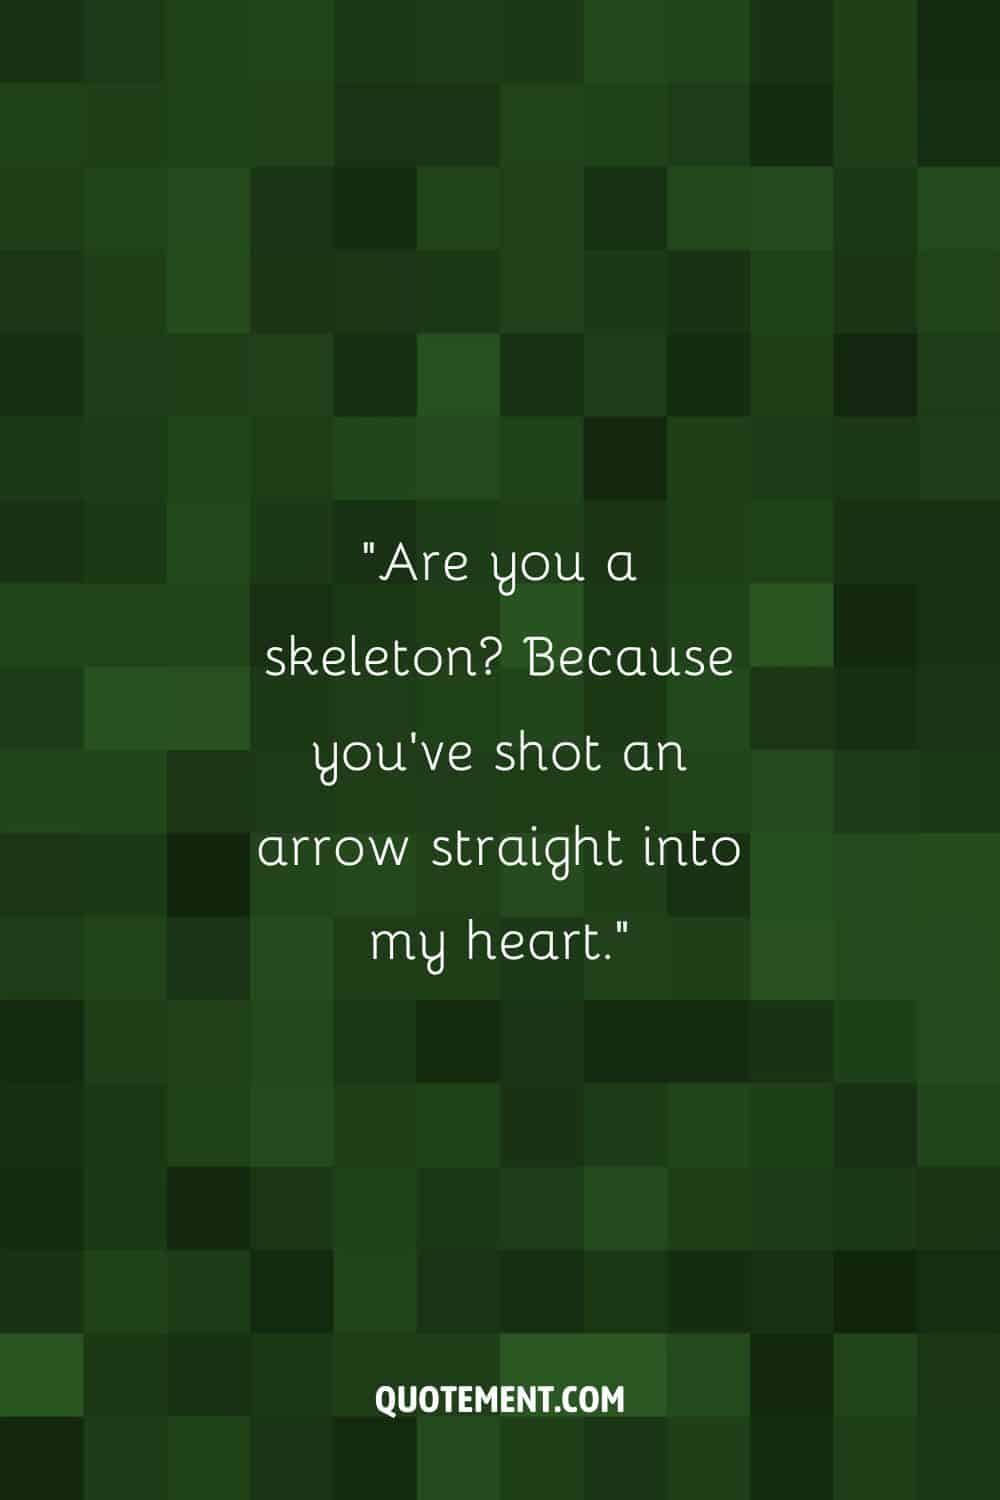 Are you a skeleton Because you've shot an arrow straight into my heart.